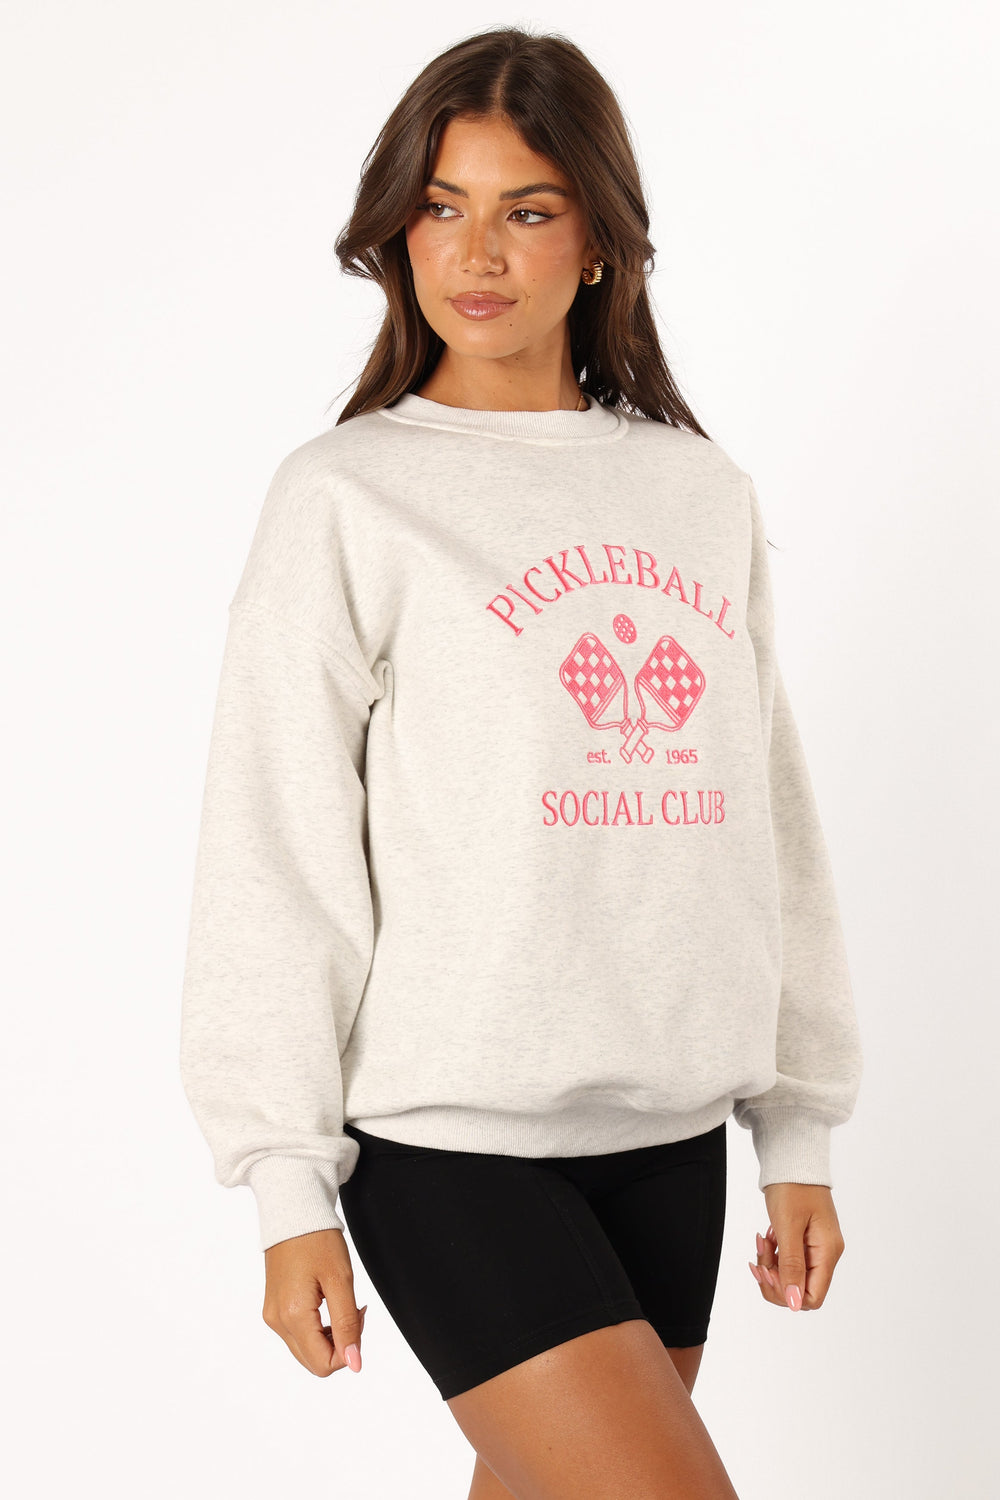 Petal and Pup USA OUTERWEAR Colette Pickleball Sweatshirt - Heather Grey